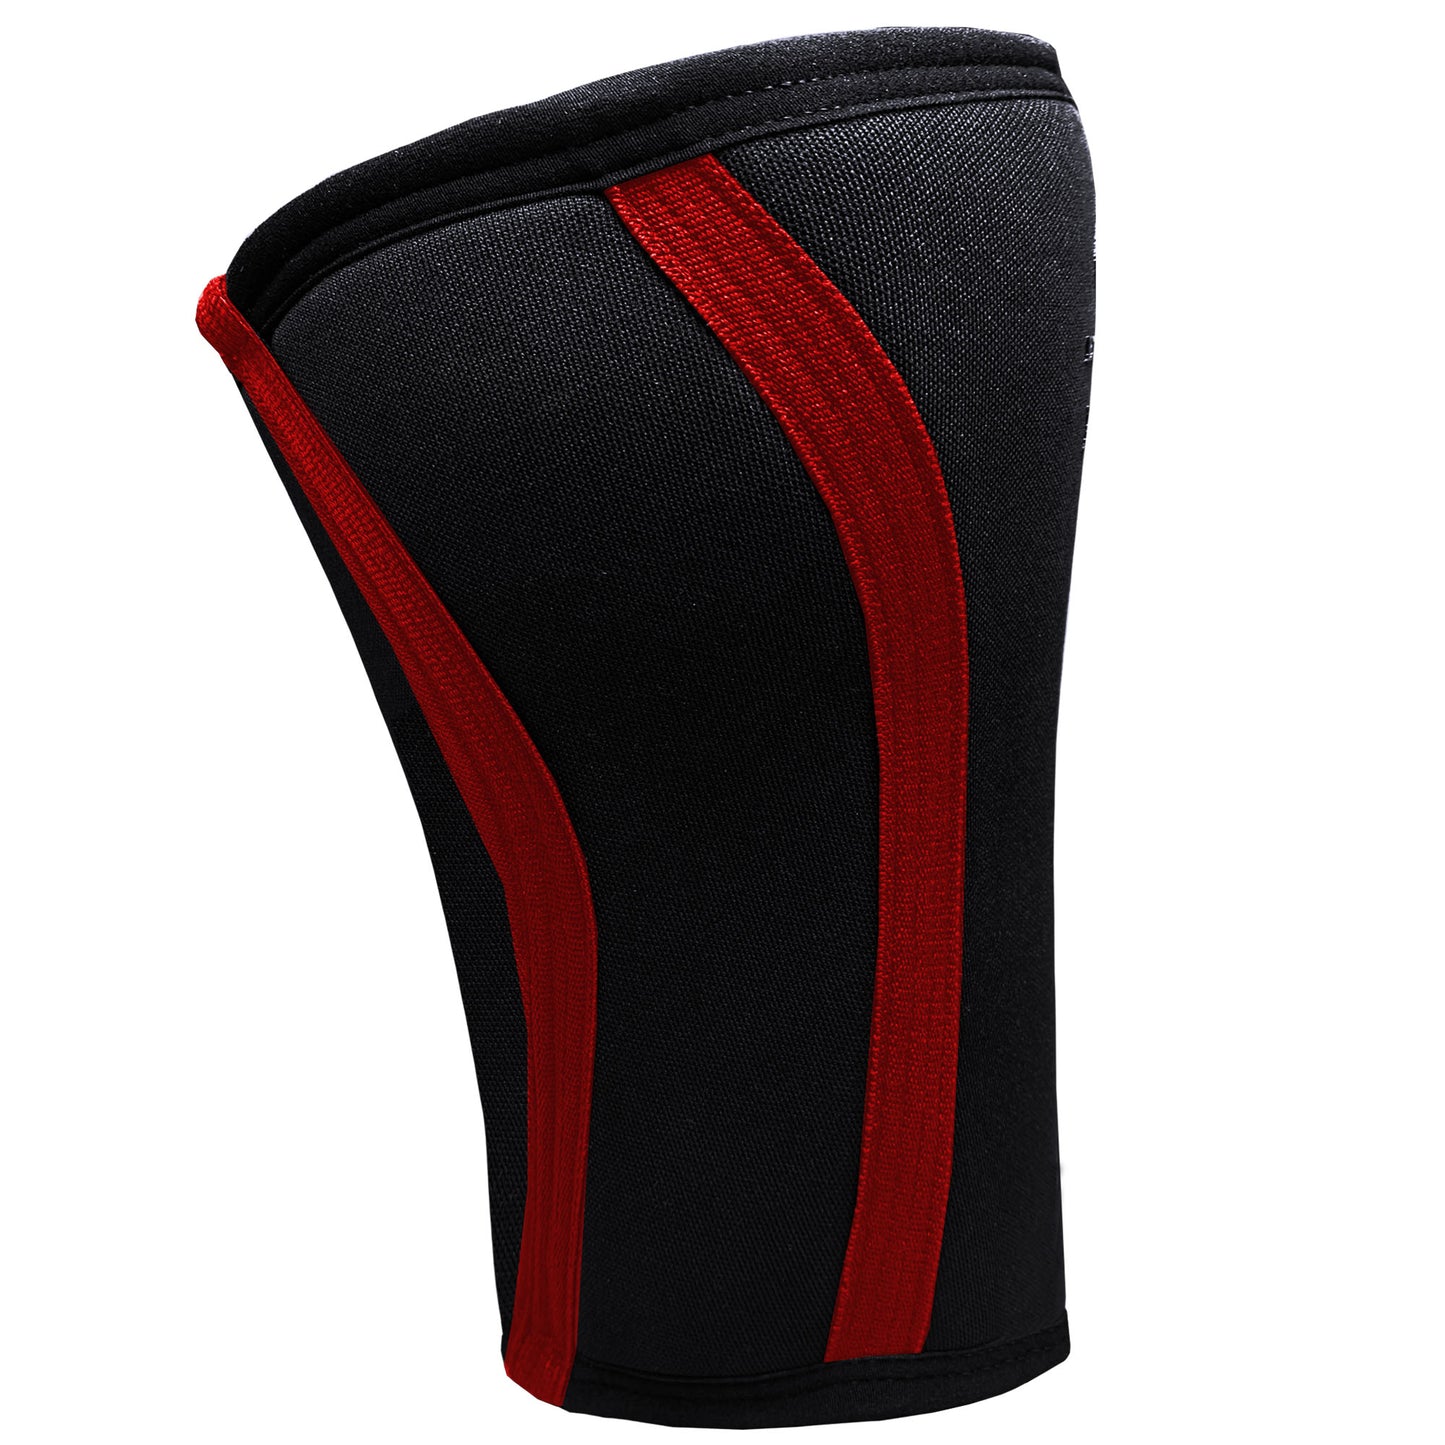 IBRO Premium 7MM Knee Sleeves (Pair) for Weightlifting & Powerlifting, Ultimate Compression Support & Injury Prevention - Squats, Deadlifts - for Men & Women, 1 Year Warranty, BlackRed